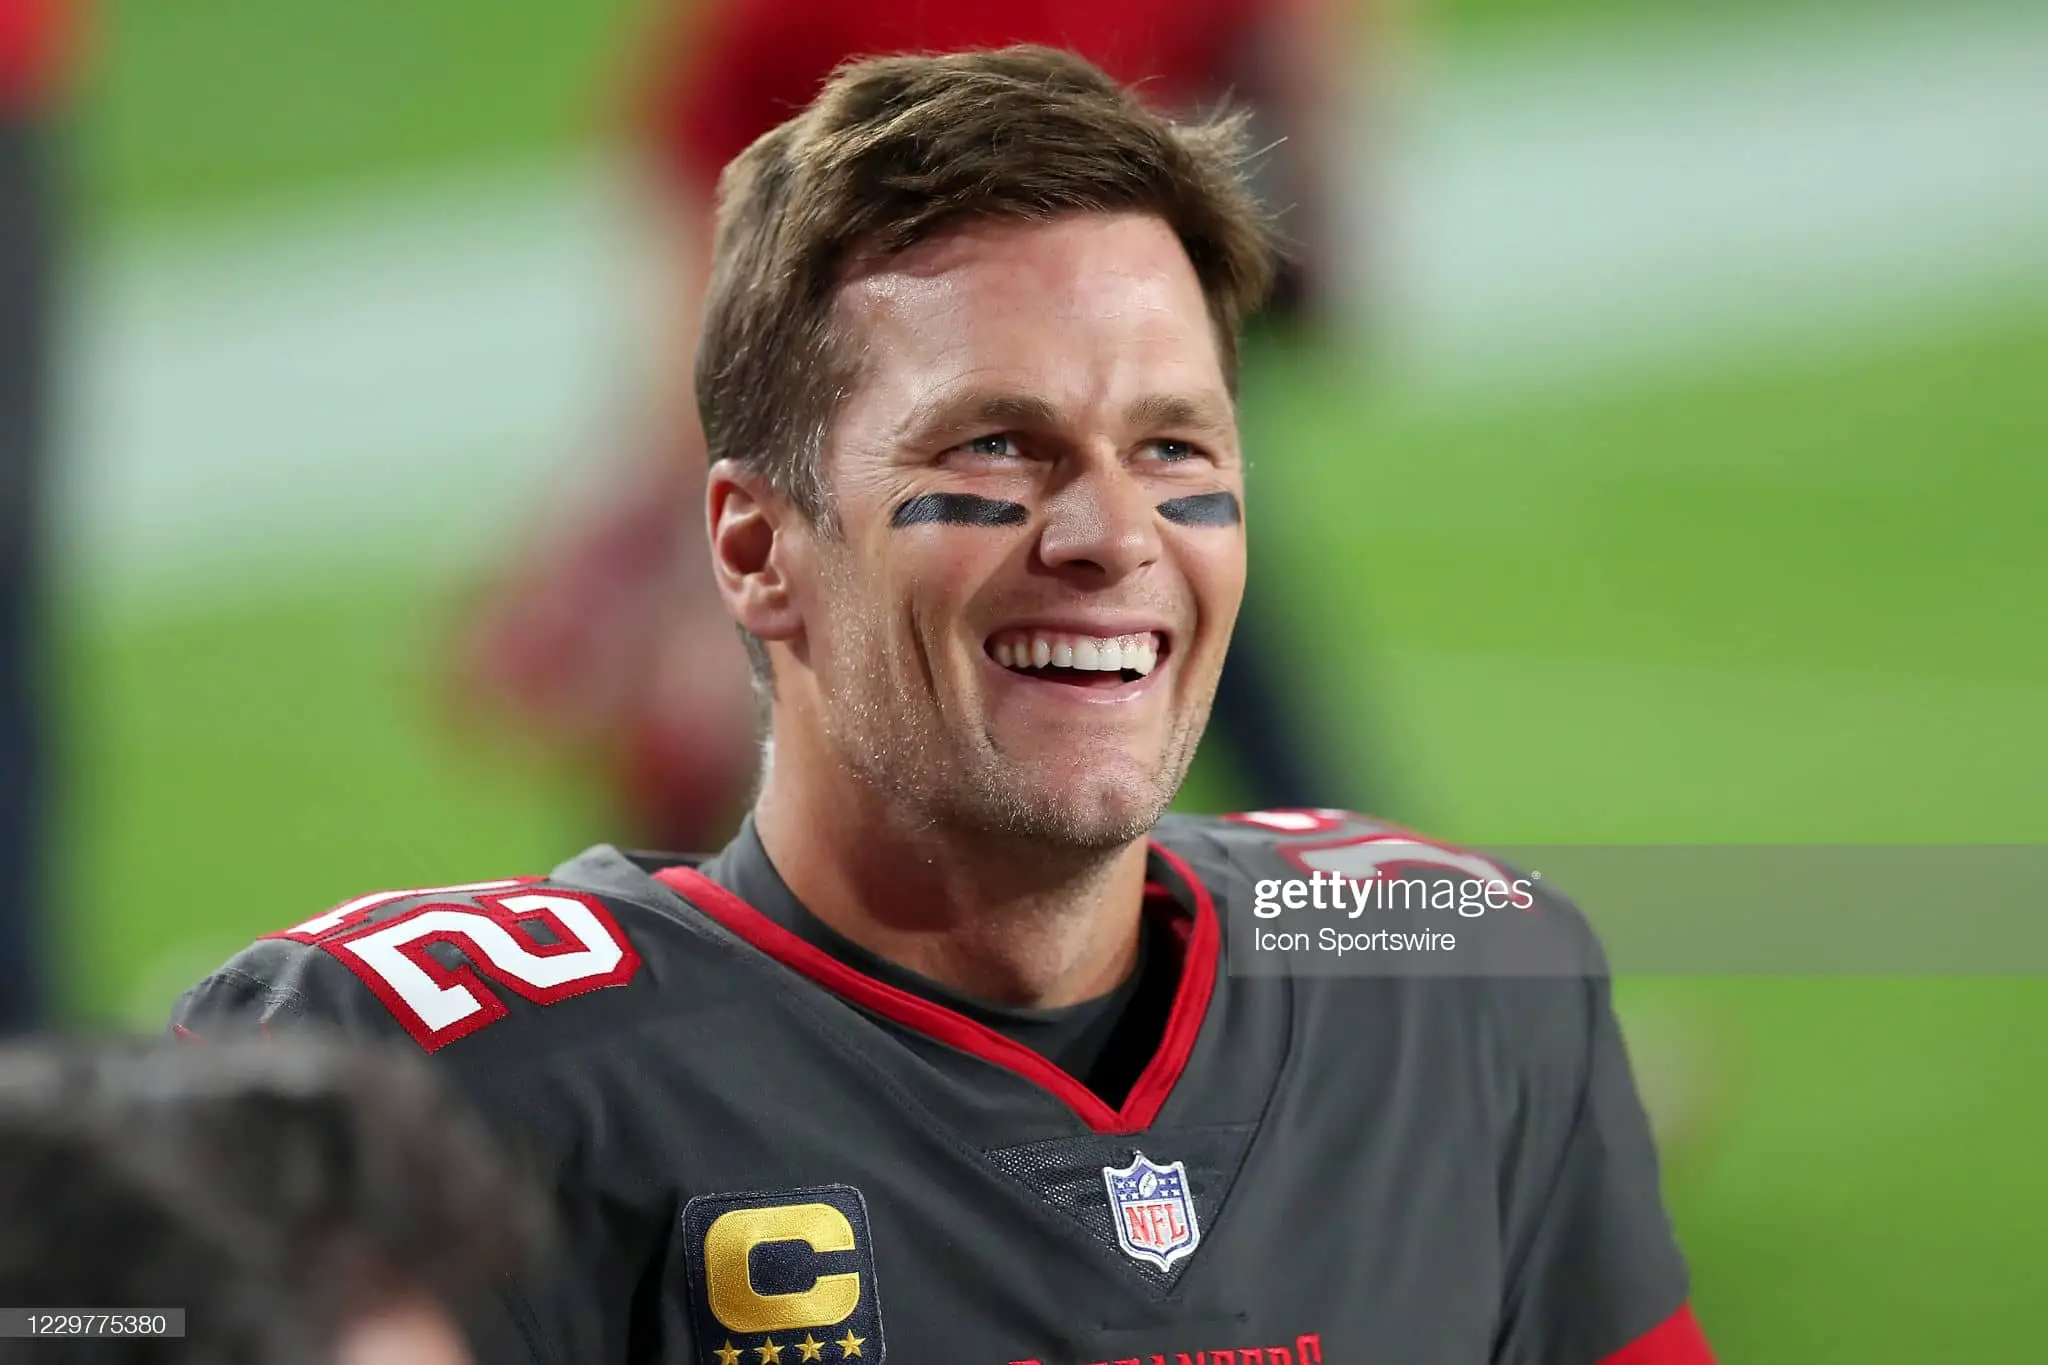 TAMPA, FL - NOVEMBER 23: Tom Brady (12) of the Buccaneers is all smiles before the regular season game between the Los Angeles Rams and the Tampa Bay Buccaneers on November 23, 2020 at Raymond James Stadium in Tampa, Florida. (Photo by Cliff Welch/Icon Sportswire via Getty Images)